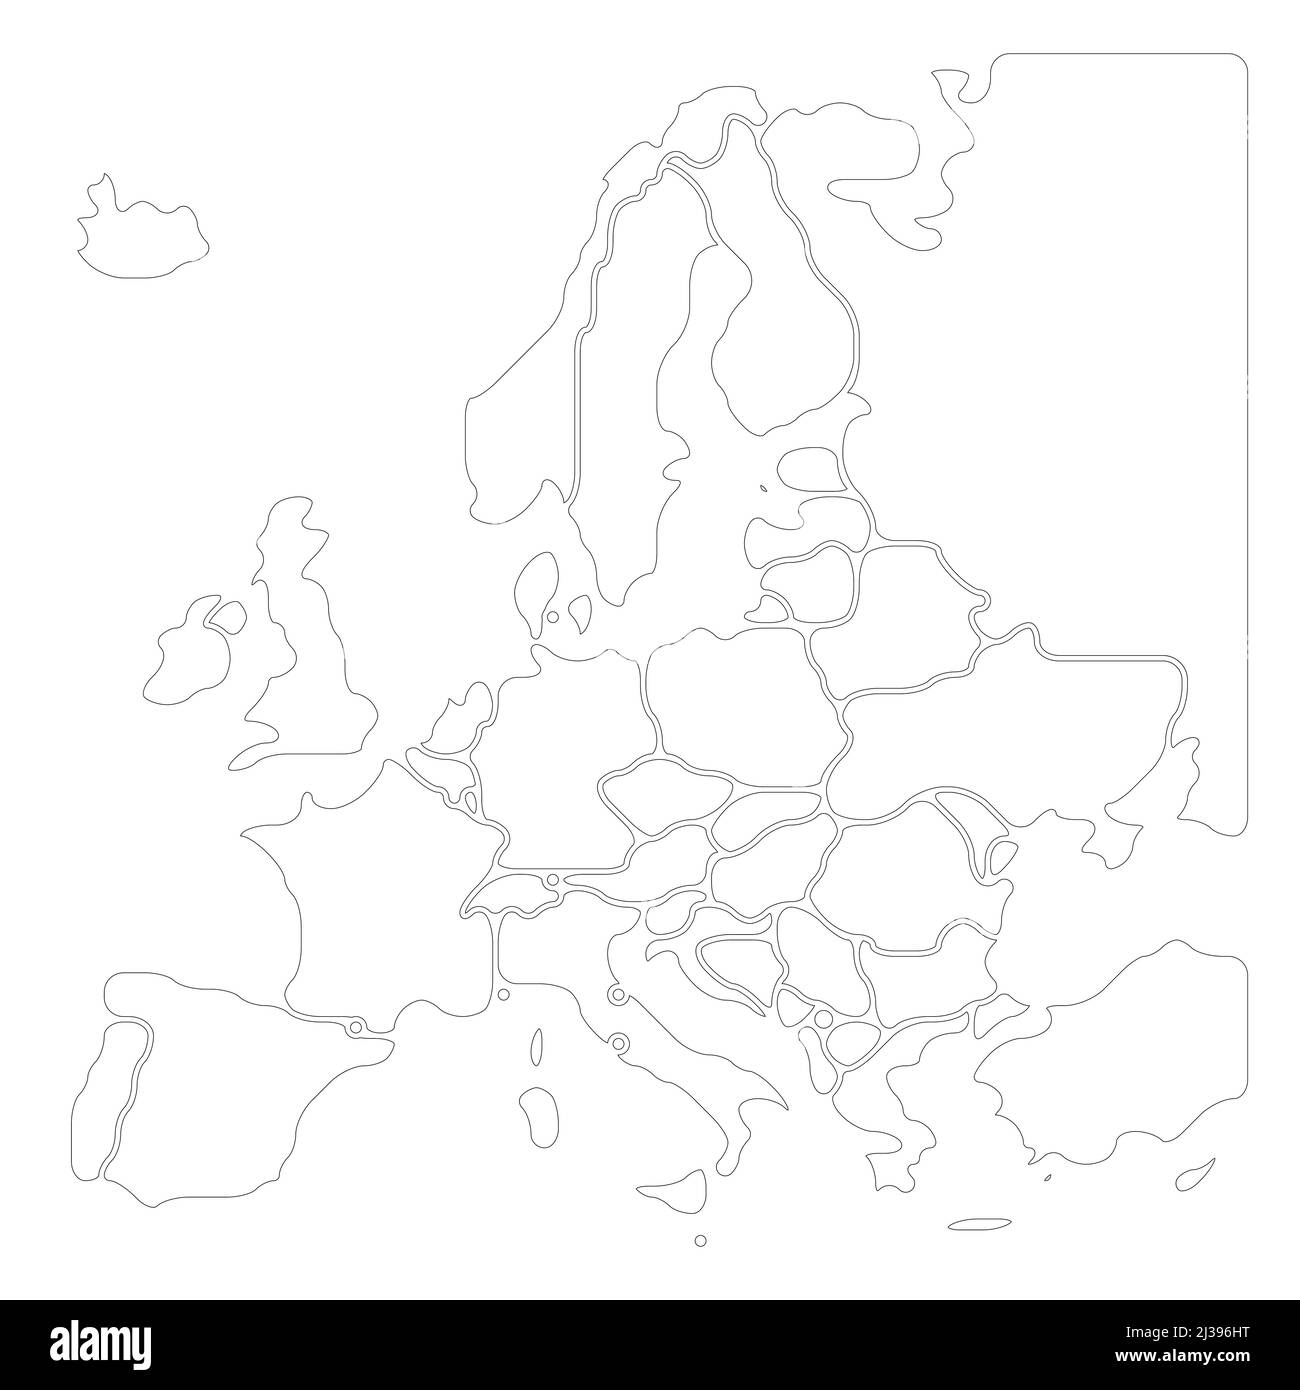 Simplified smooth map of Europe Stock Vector